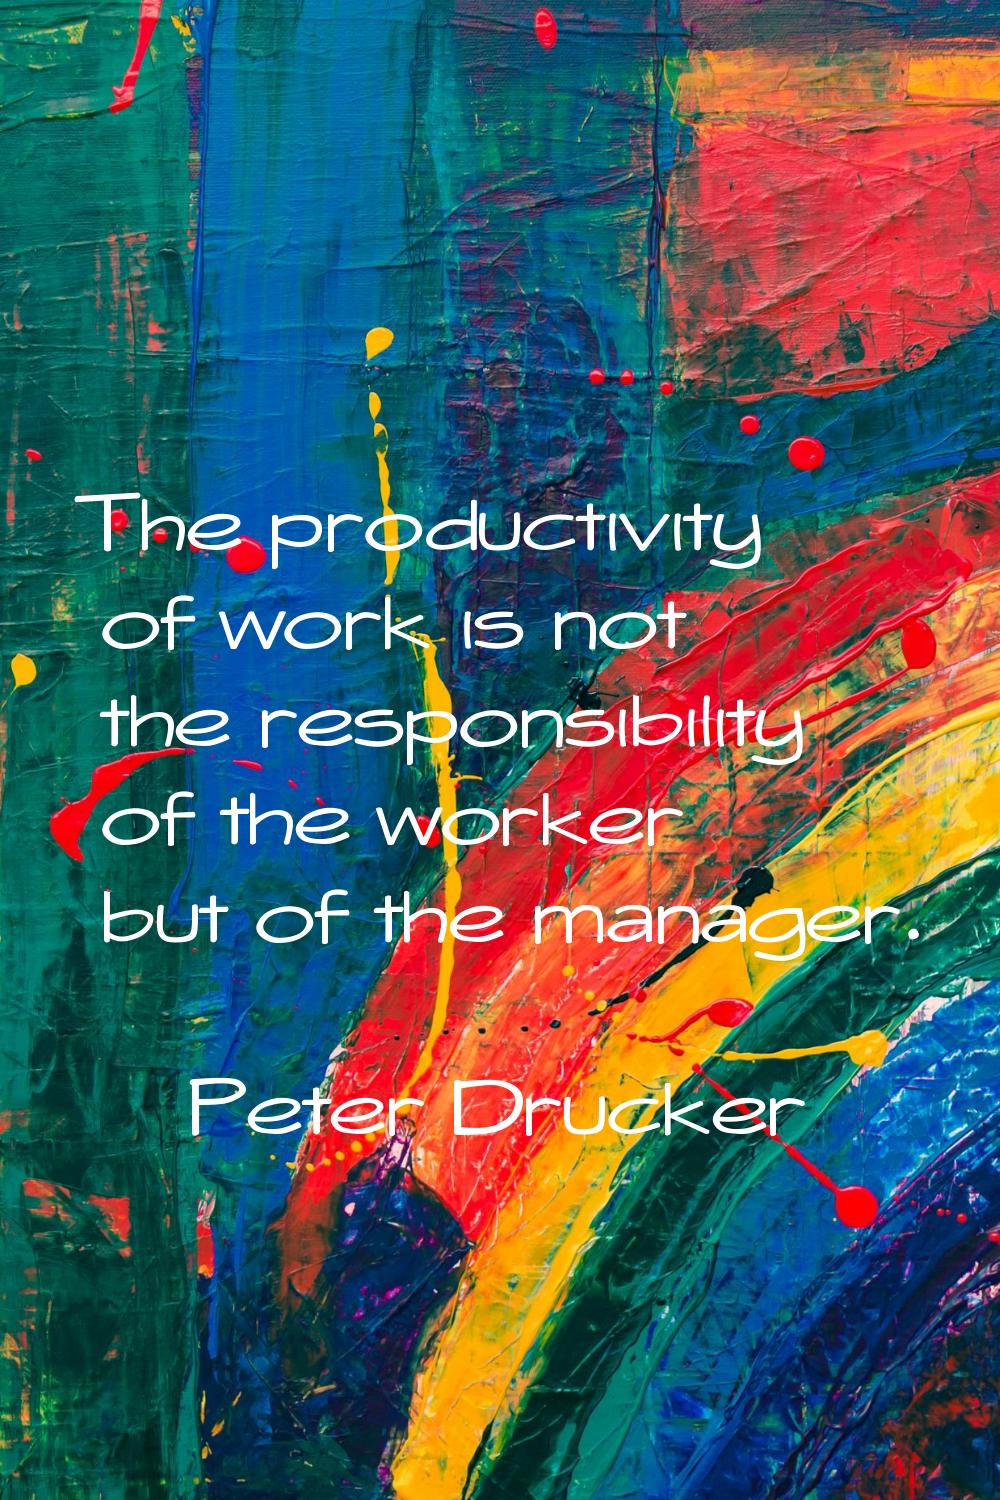 The productivity of work is not the responsibility of the worker but of the manager.